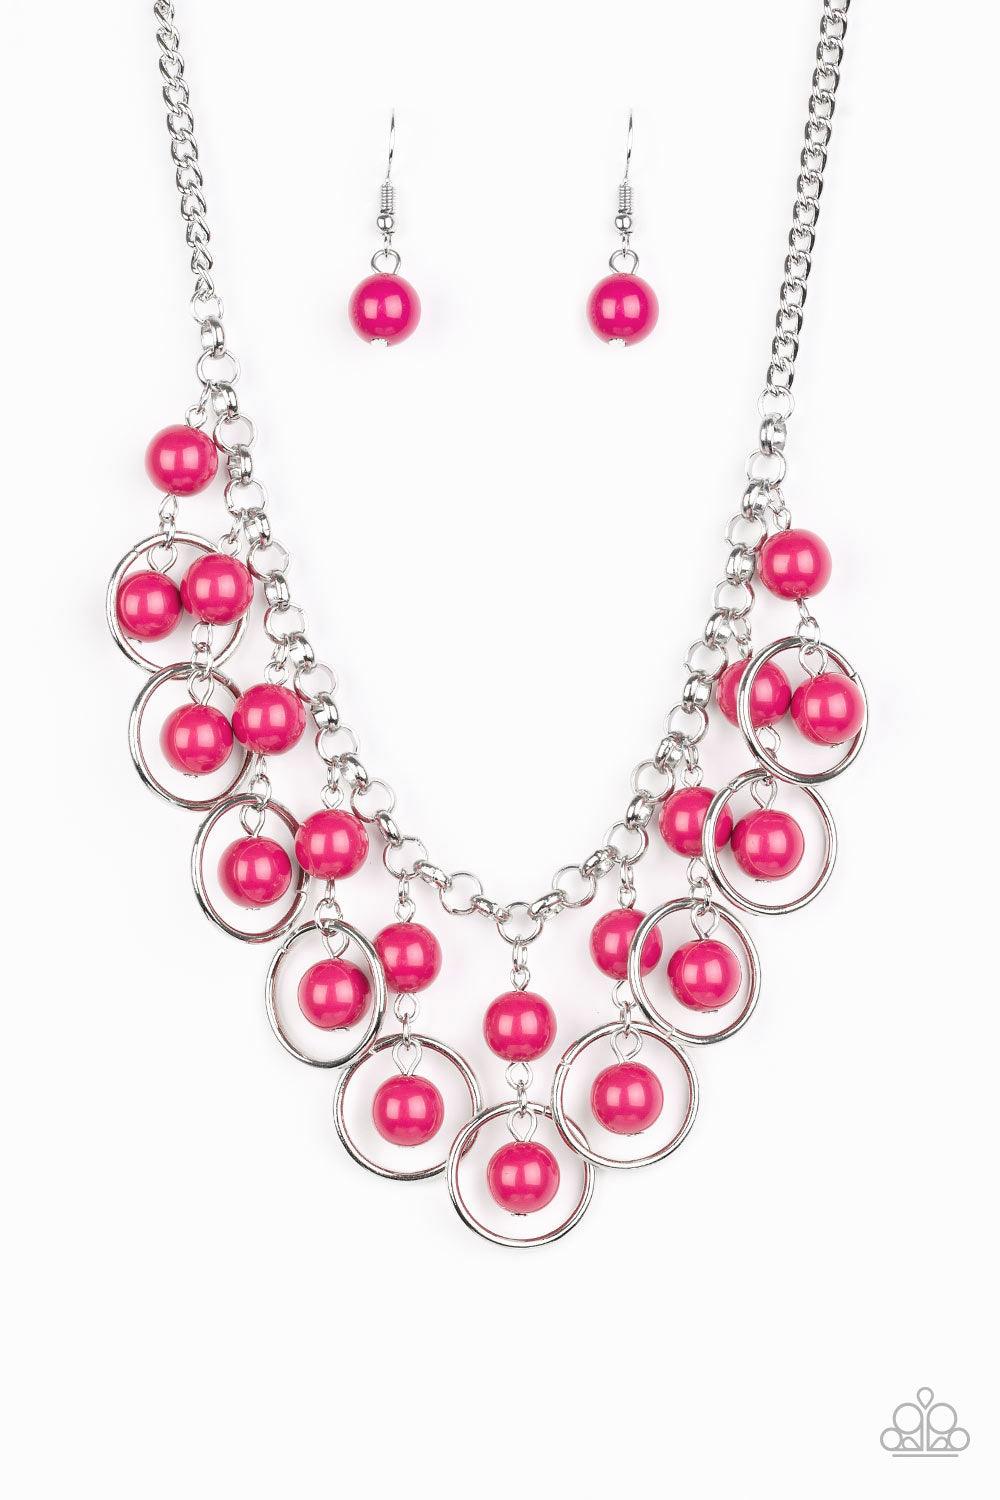 Paparazzi Accessories Really Rococo - Pink Polished pink beads and shimmery silver hoops drip from the bottom of a glistening silver chain, creating a playful fringe below the collar. Features an adjustable clasp closure. Sold as one individual necklace.